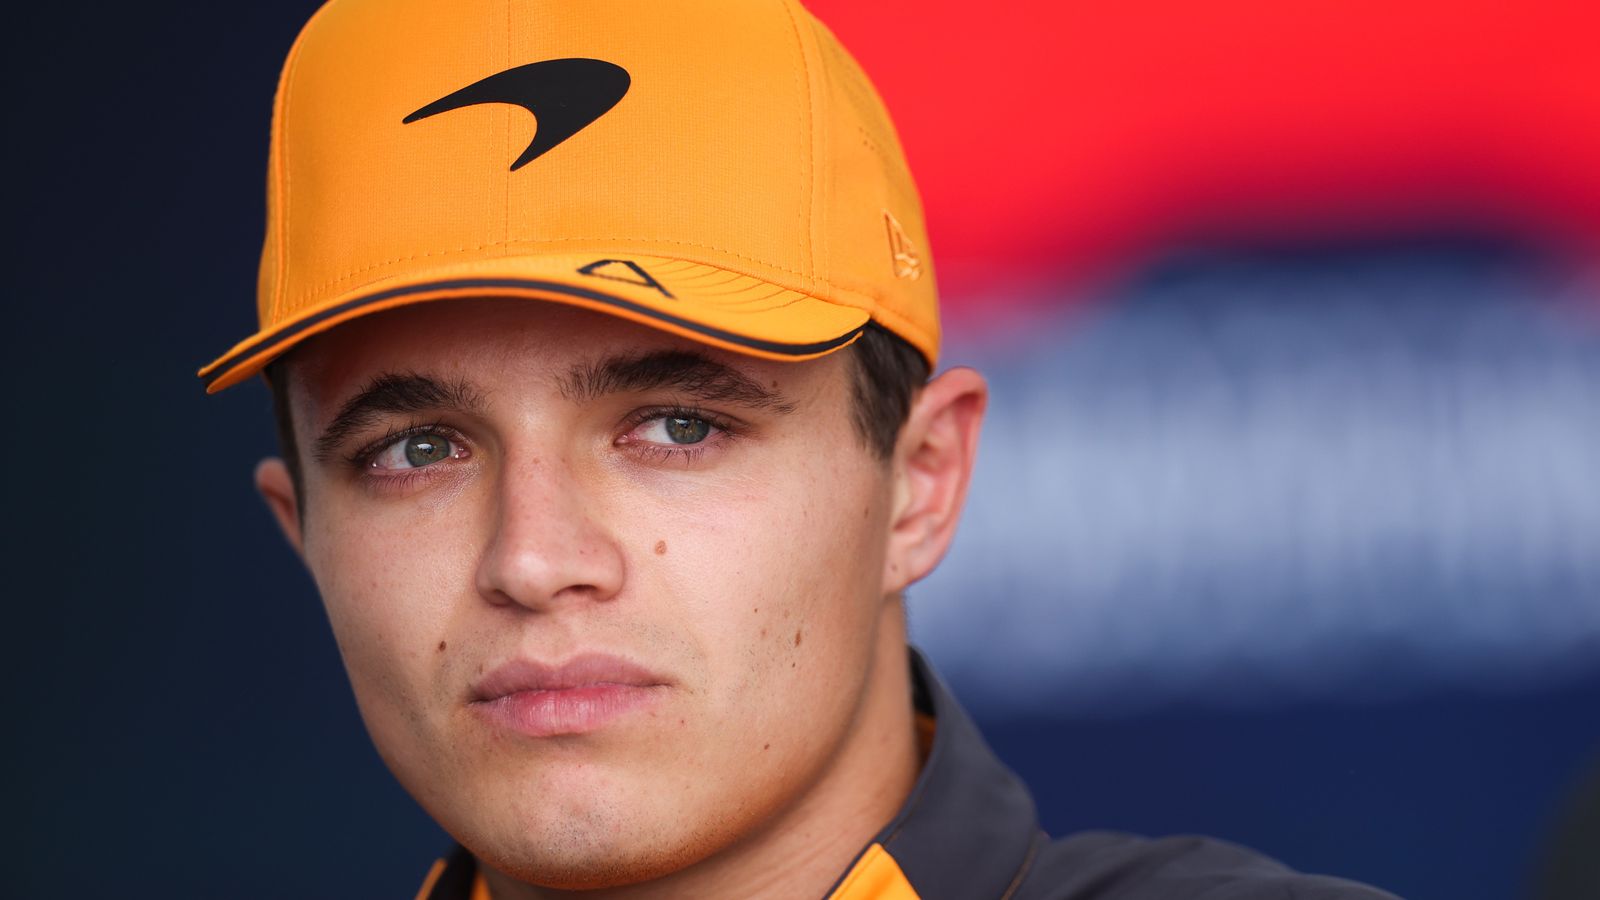 lando-norris-mclaren-driver-confirms-he-spoke-to-red-bull-before-signing-long-term-deal